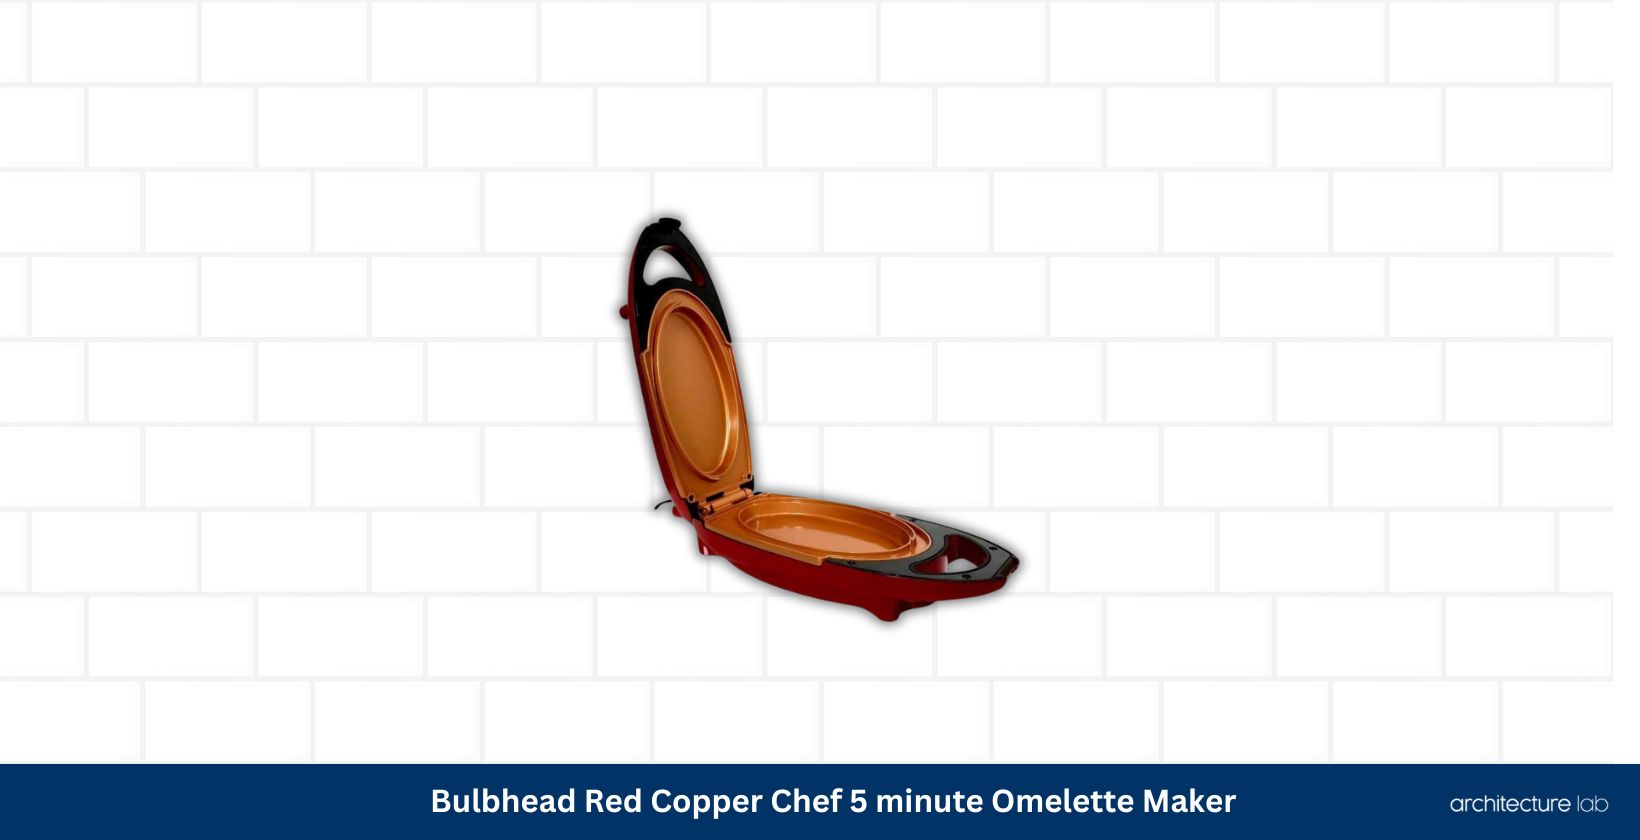 Bulbhead red copper chef 5 minute omelette maker